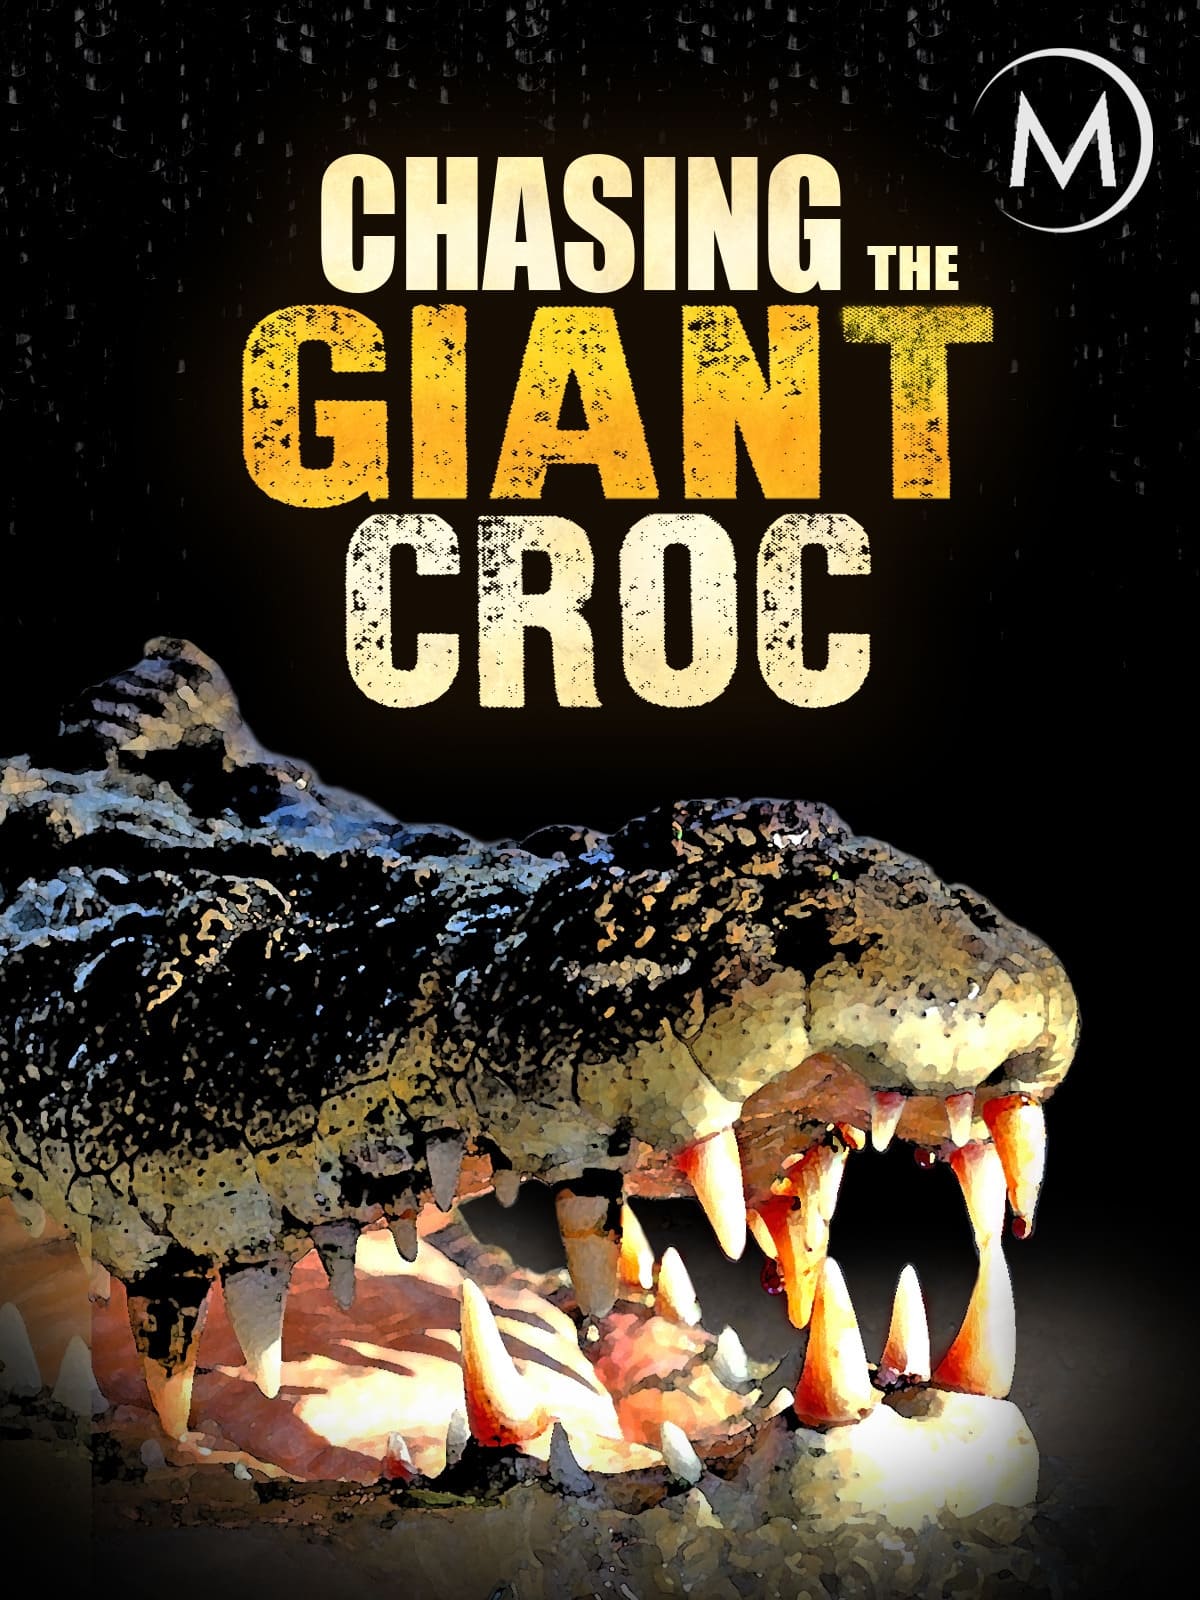 Chasing the Giant Croc